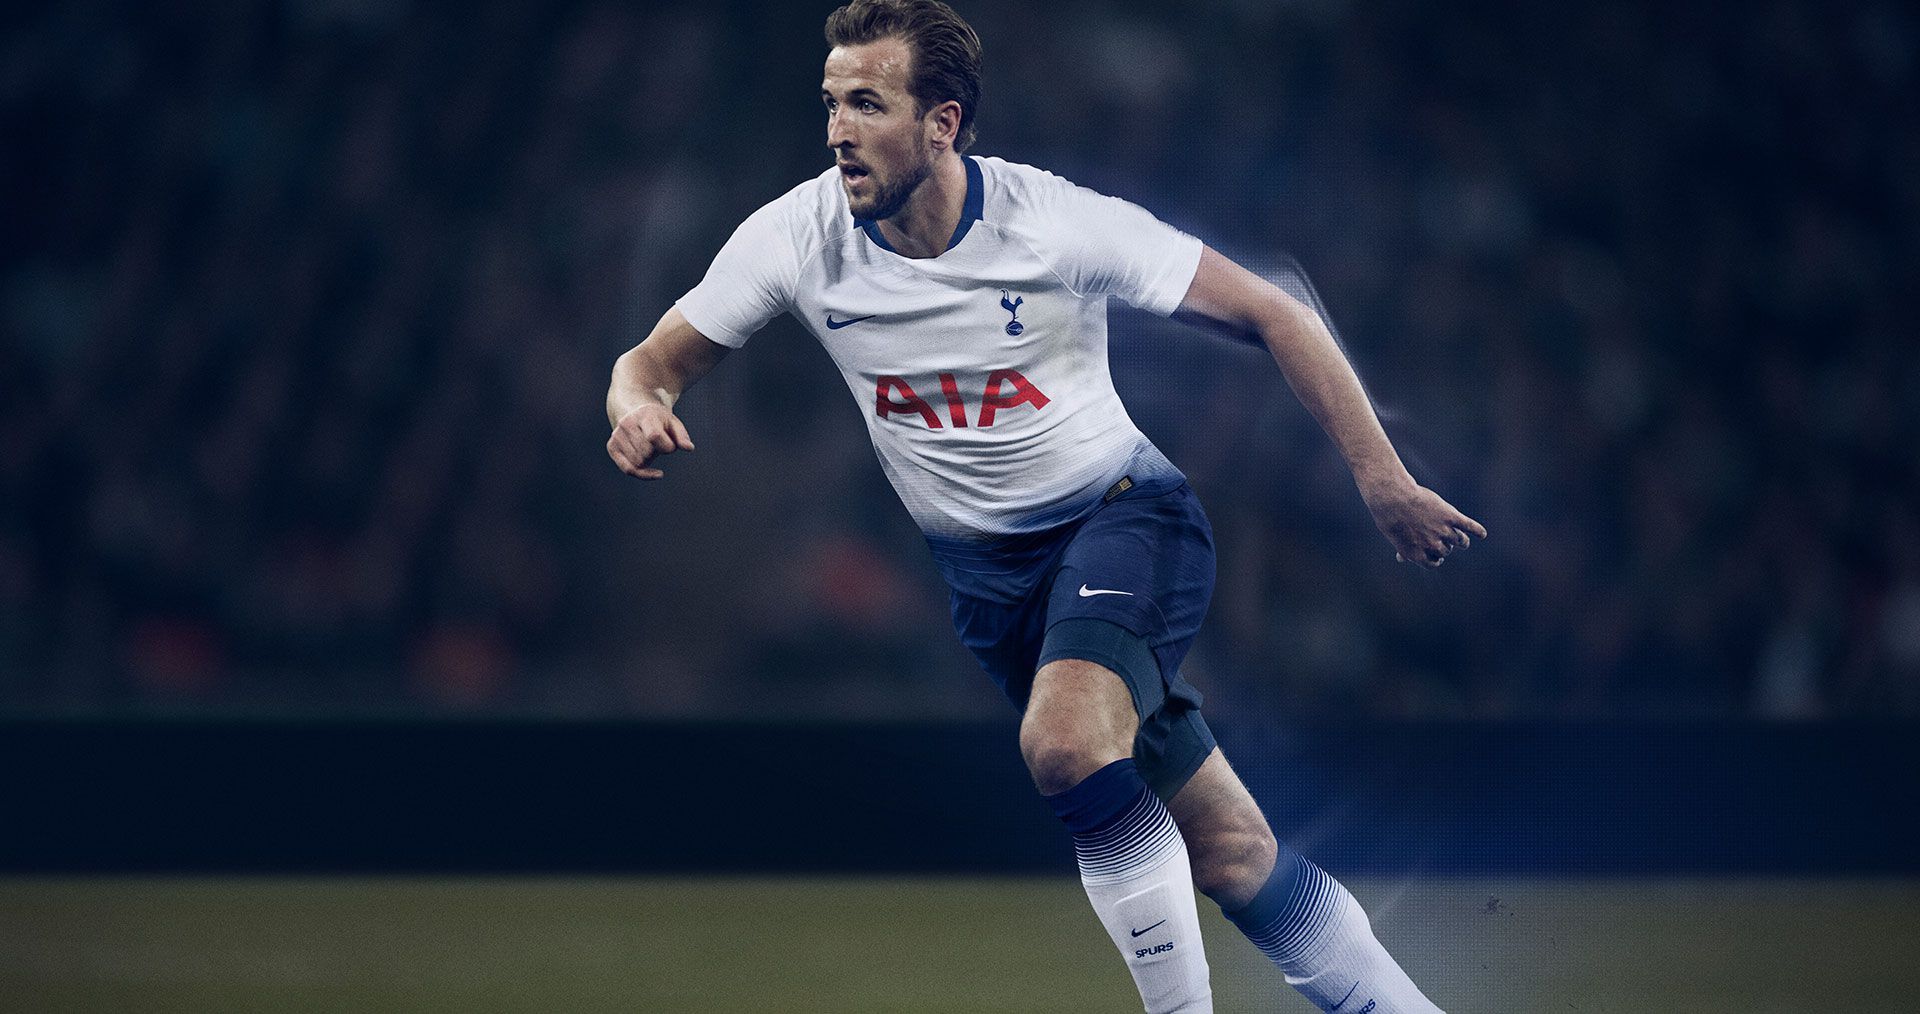 Tottenham Hotspur third kit 2022/23 OUT NOW: Here's where you can buy